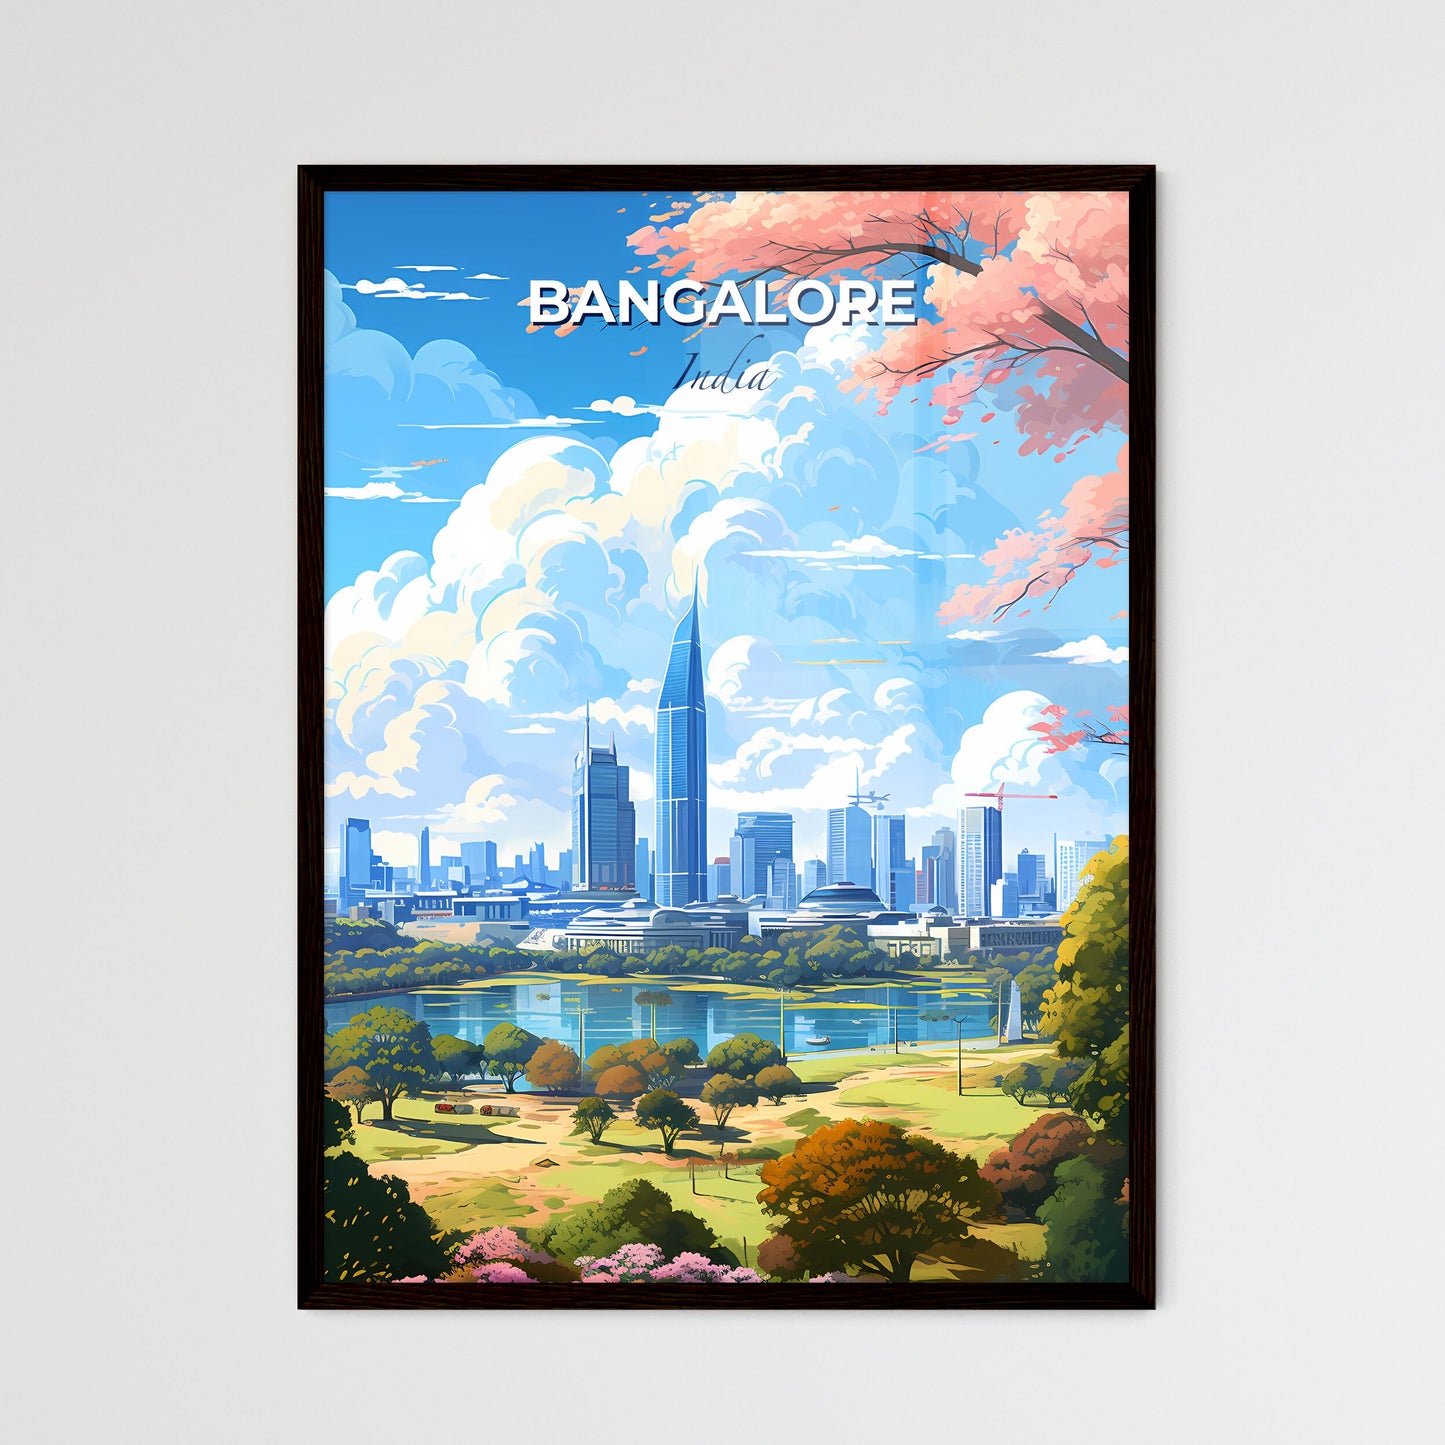 Bangalore India Skyline - A City Landscape With Trees And A River - Customizable Travel Gift Default Title